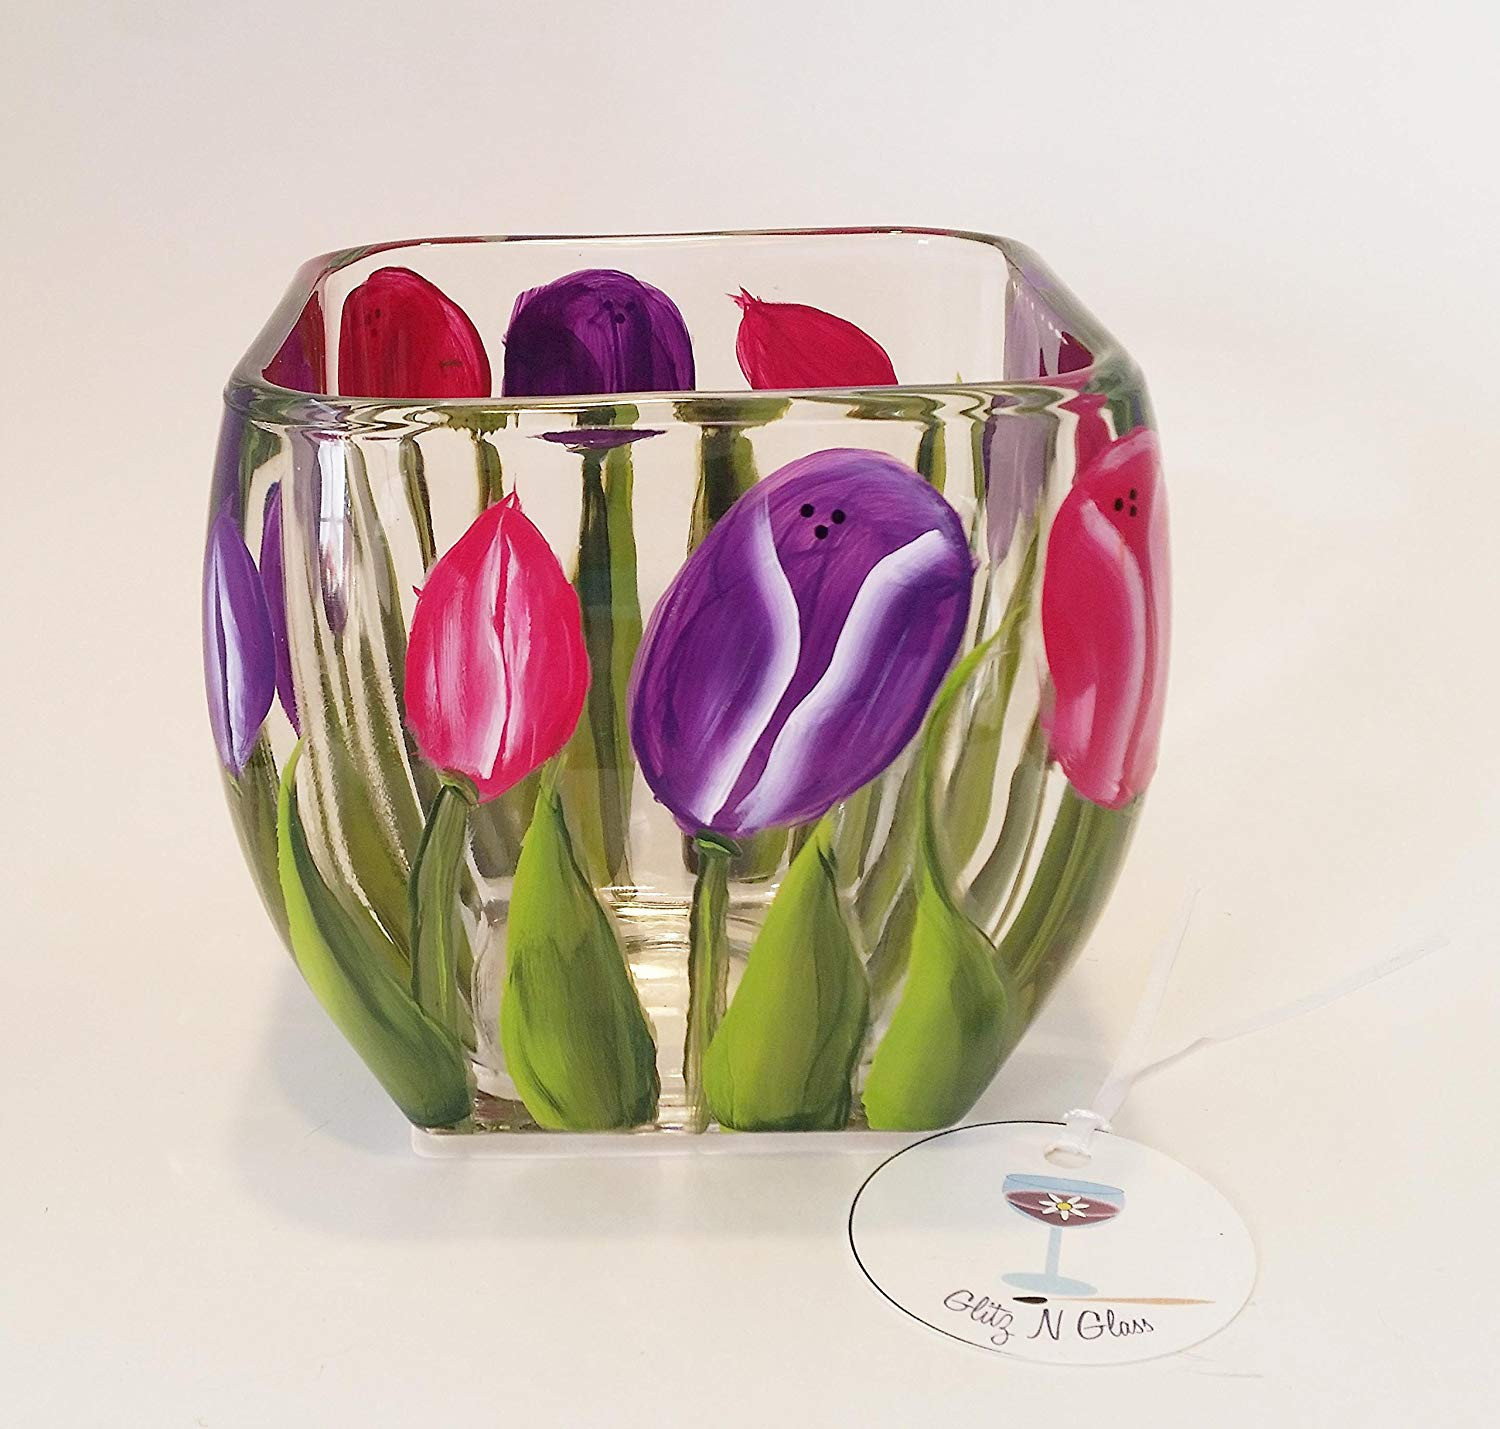 22 Famous Kosta Boda Glass Vase 2022 free download kosta boda glass vase of purple glass bowl gallery amazon hand painted glass square bowl pink with amazon hand painted glass square bowl pink and purple tulips kosta boda scandinavian